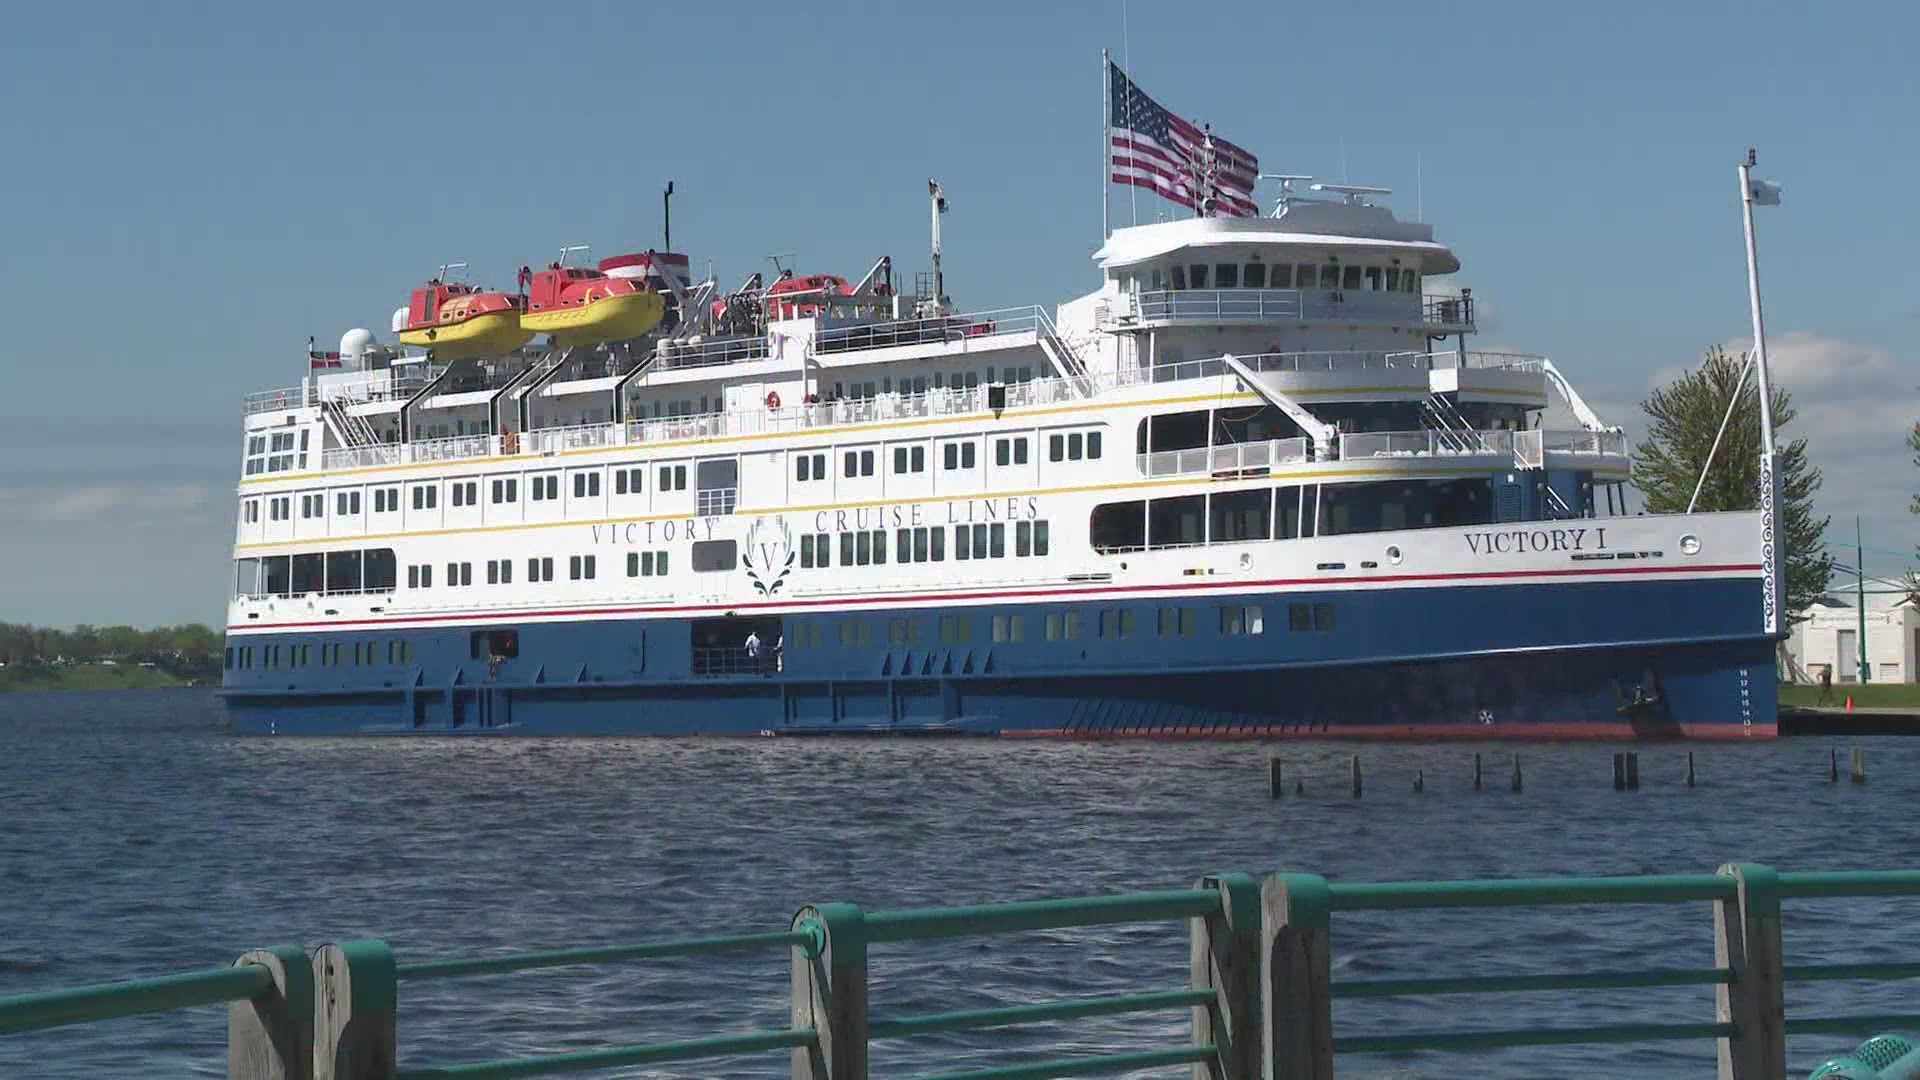 2020 was scheduled to be a record year for cruise ships stops at the Heritage Landing dock in Muskegon with four-ships making 35-stops.